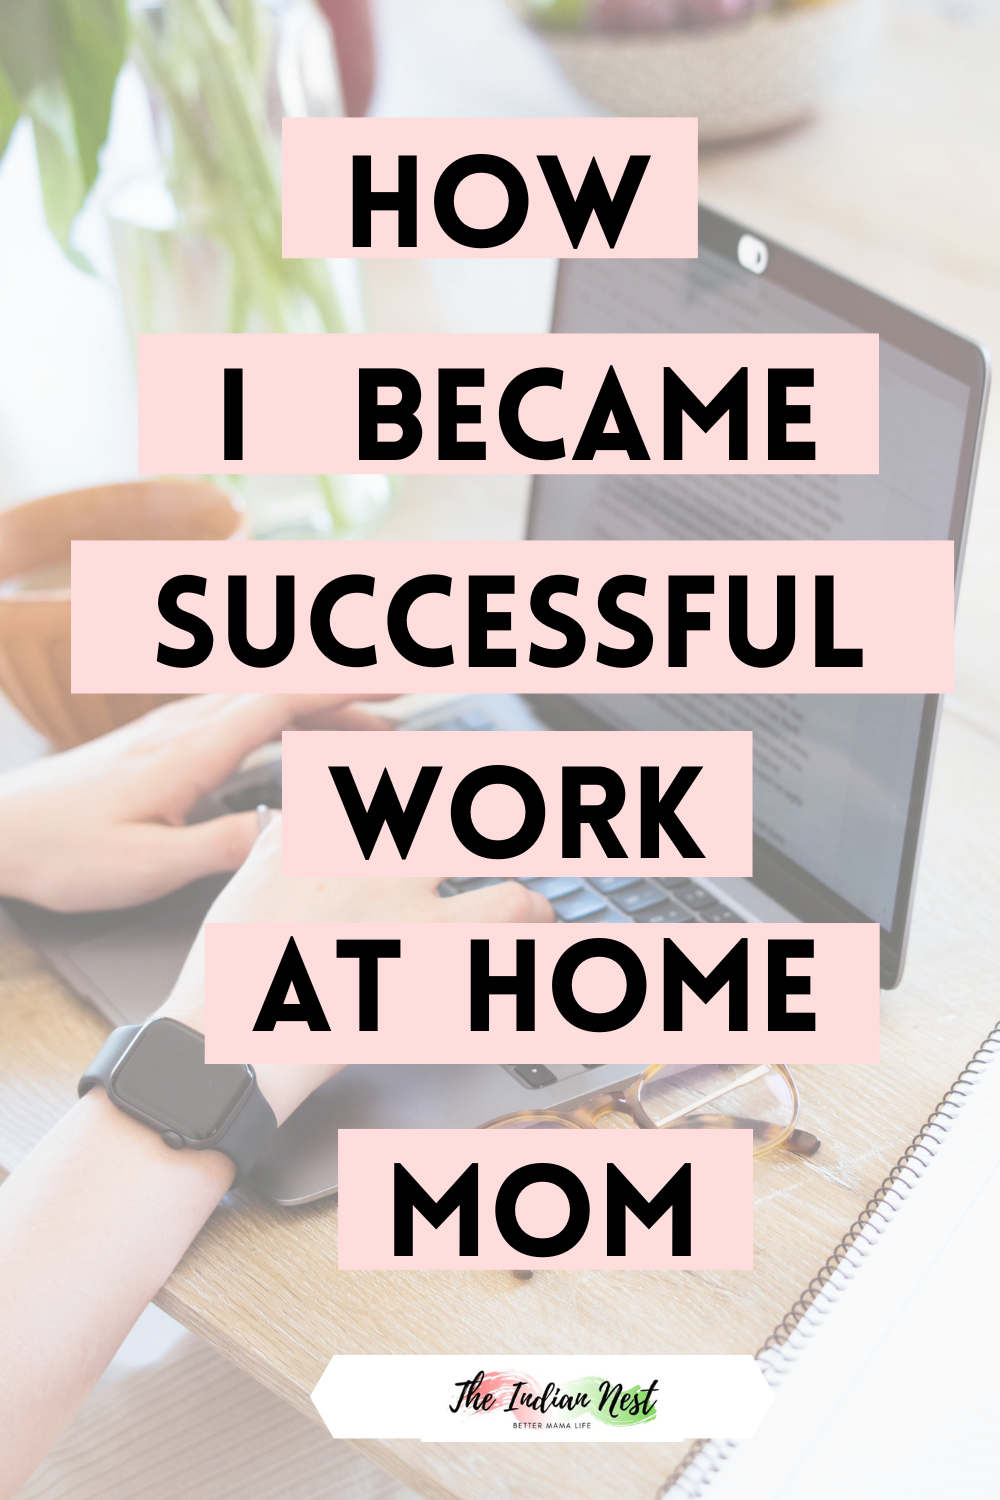 Mom Tips To Become Successful Work-At-Home Mom